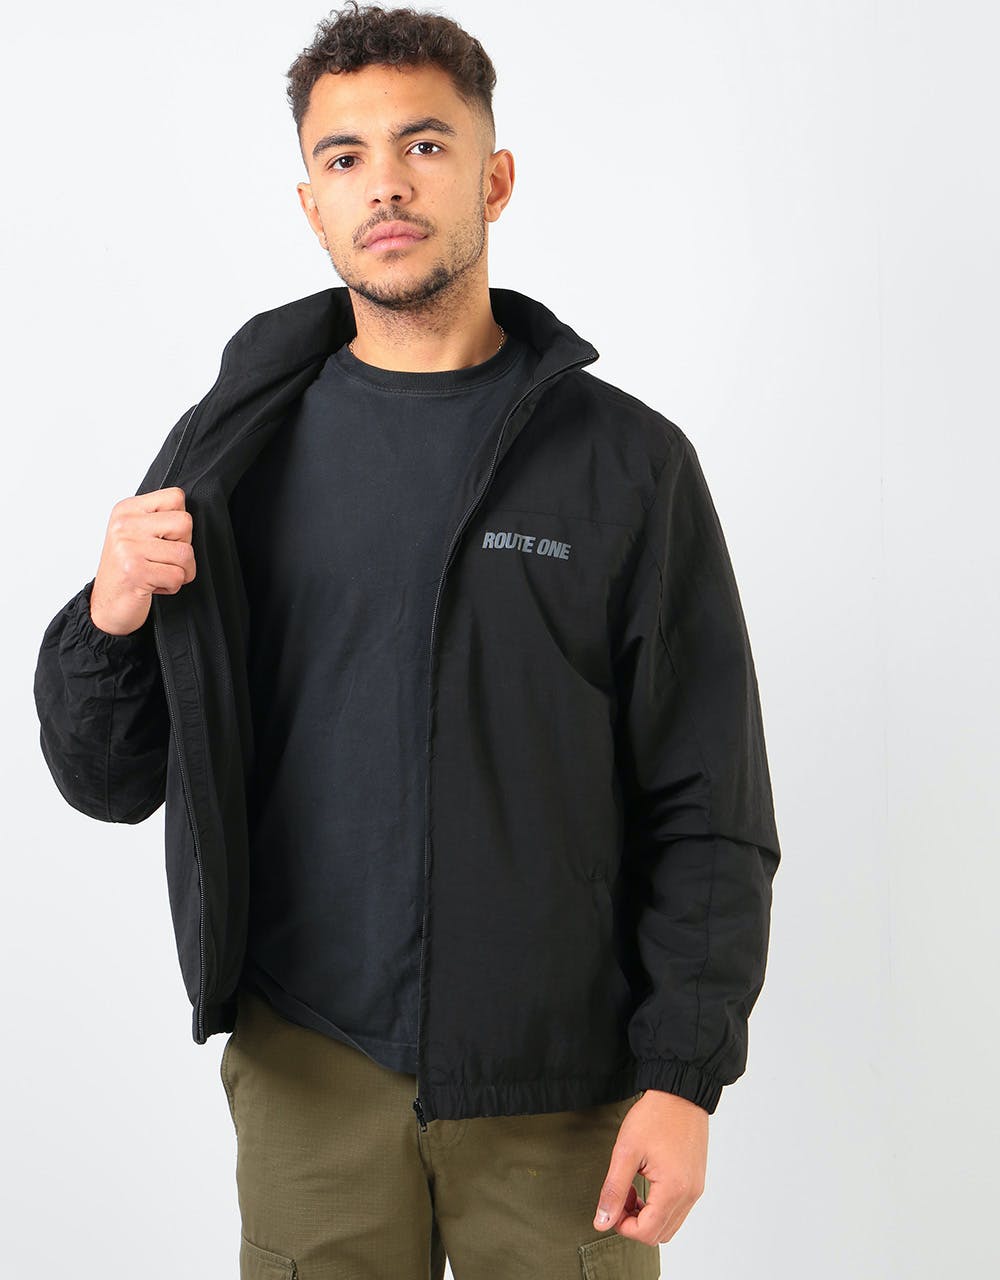 Route One Jammin Track Jacket - Black